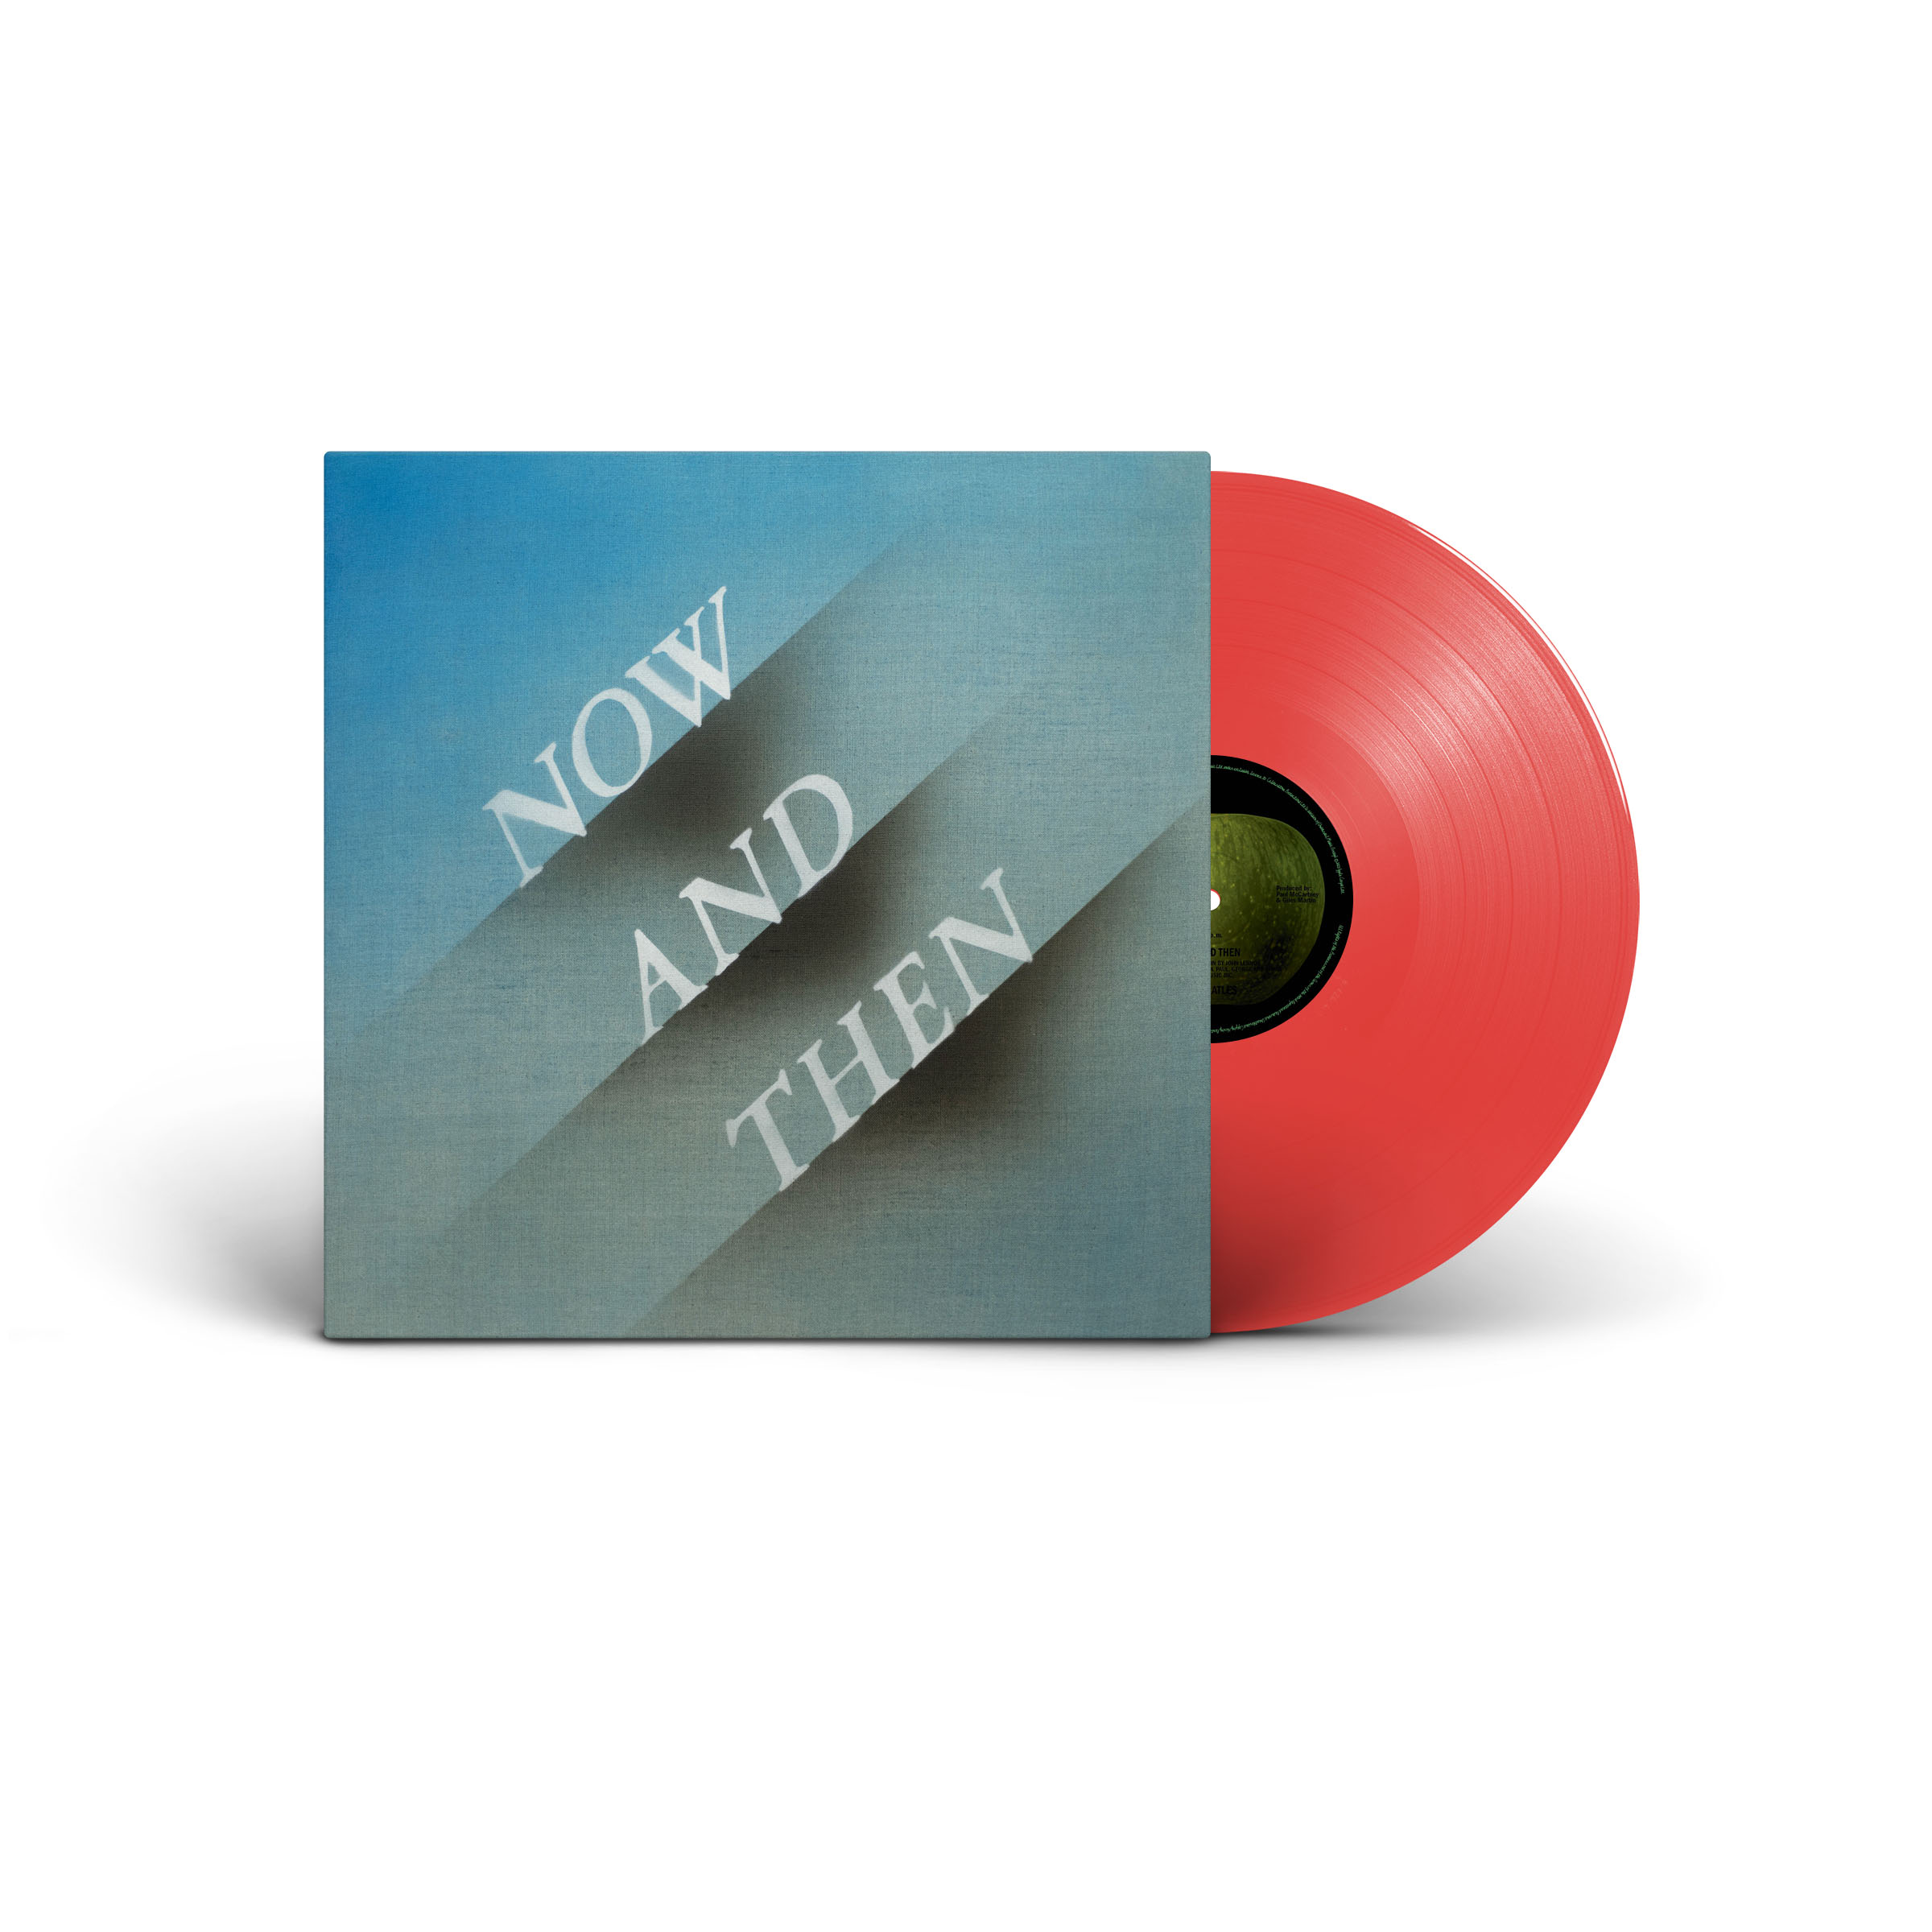 "Now And Then" 12" Single Red